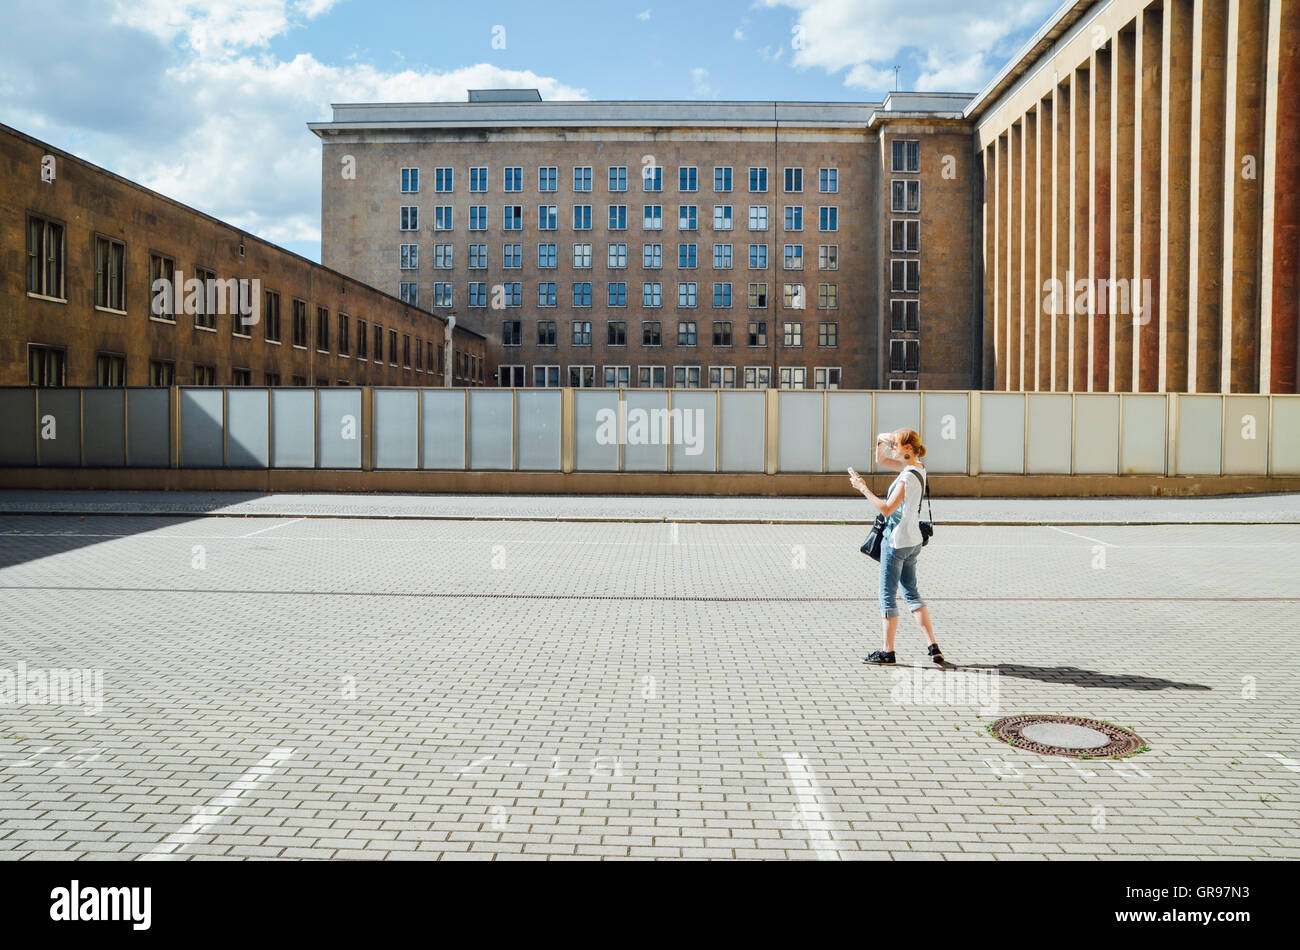 Full Length Side View Of Woman Photographing On Street Against Buildings Stock Photo